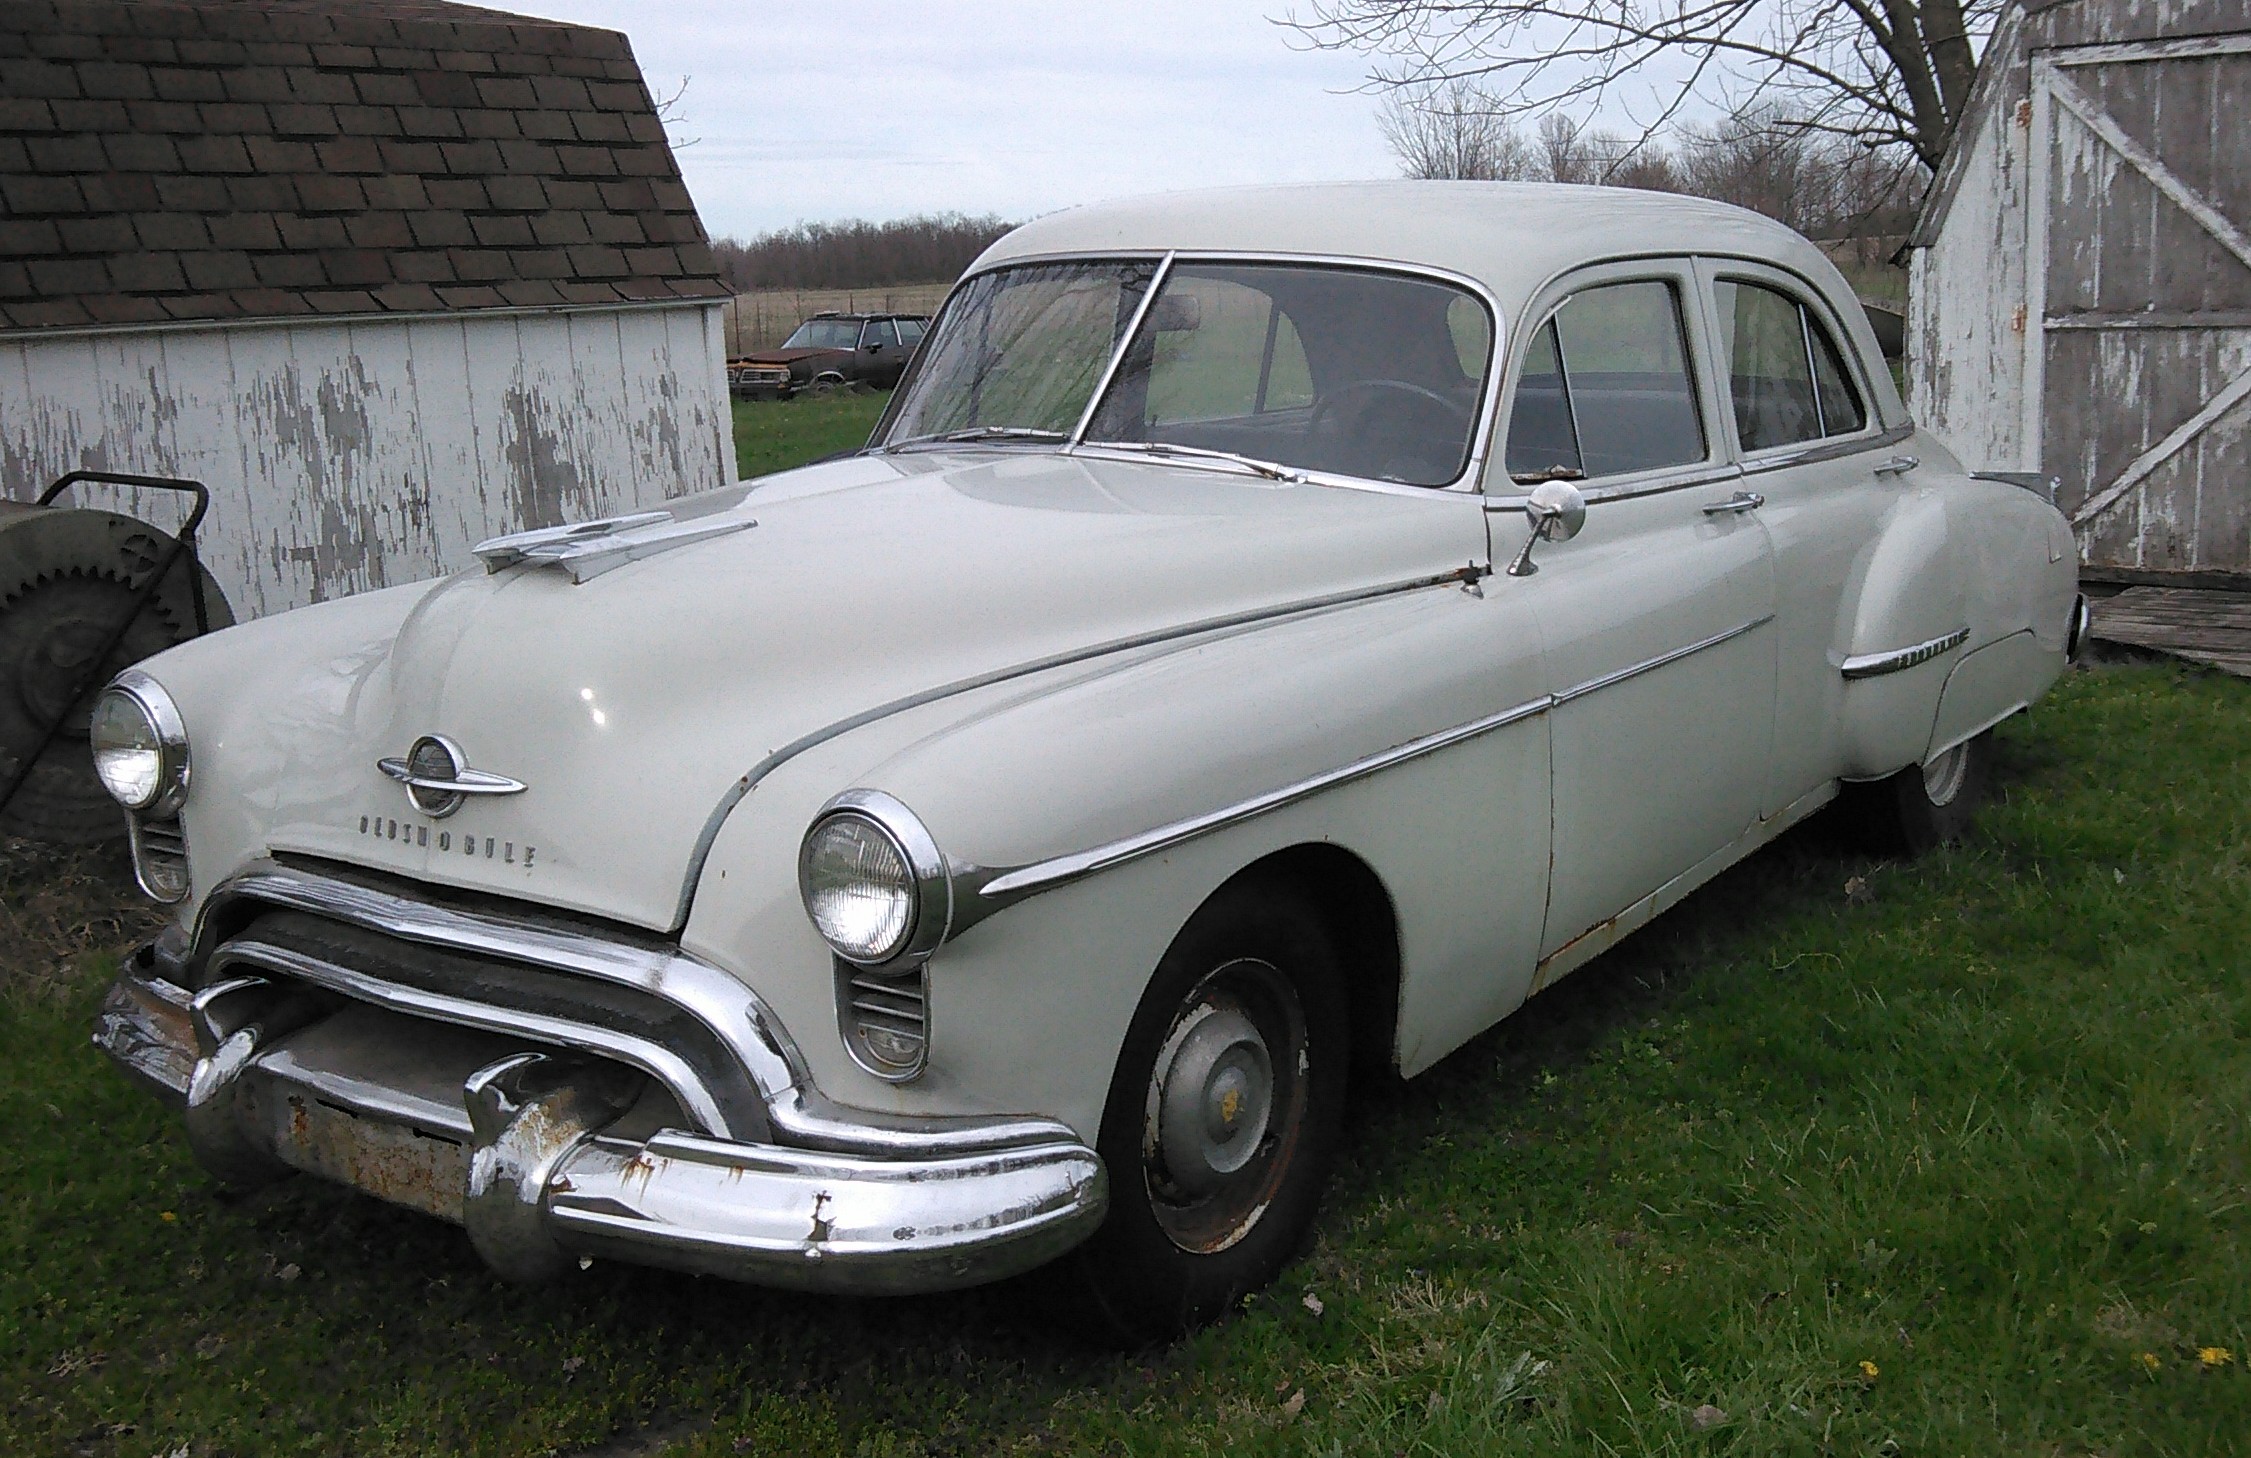 Also my 1950 oldsmobile 88. My first car. I've had it since 1975, when I was12